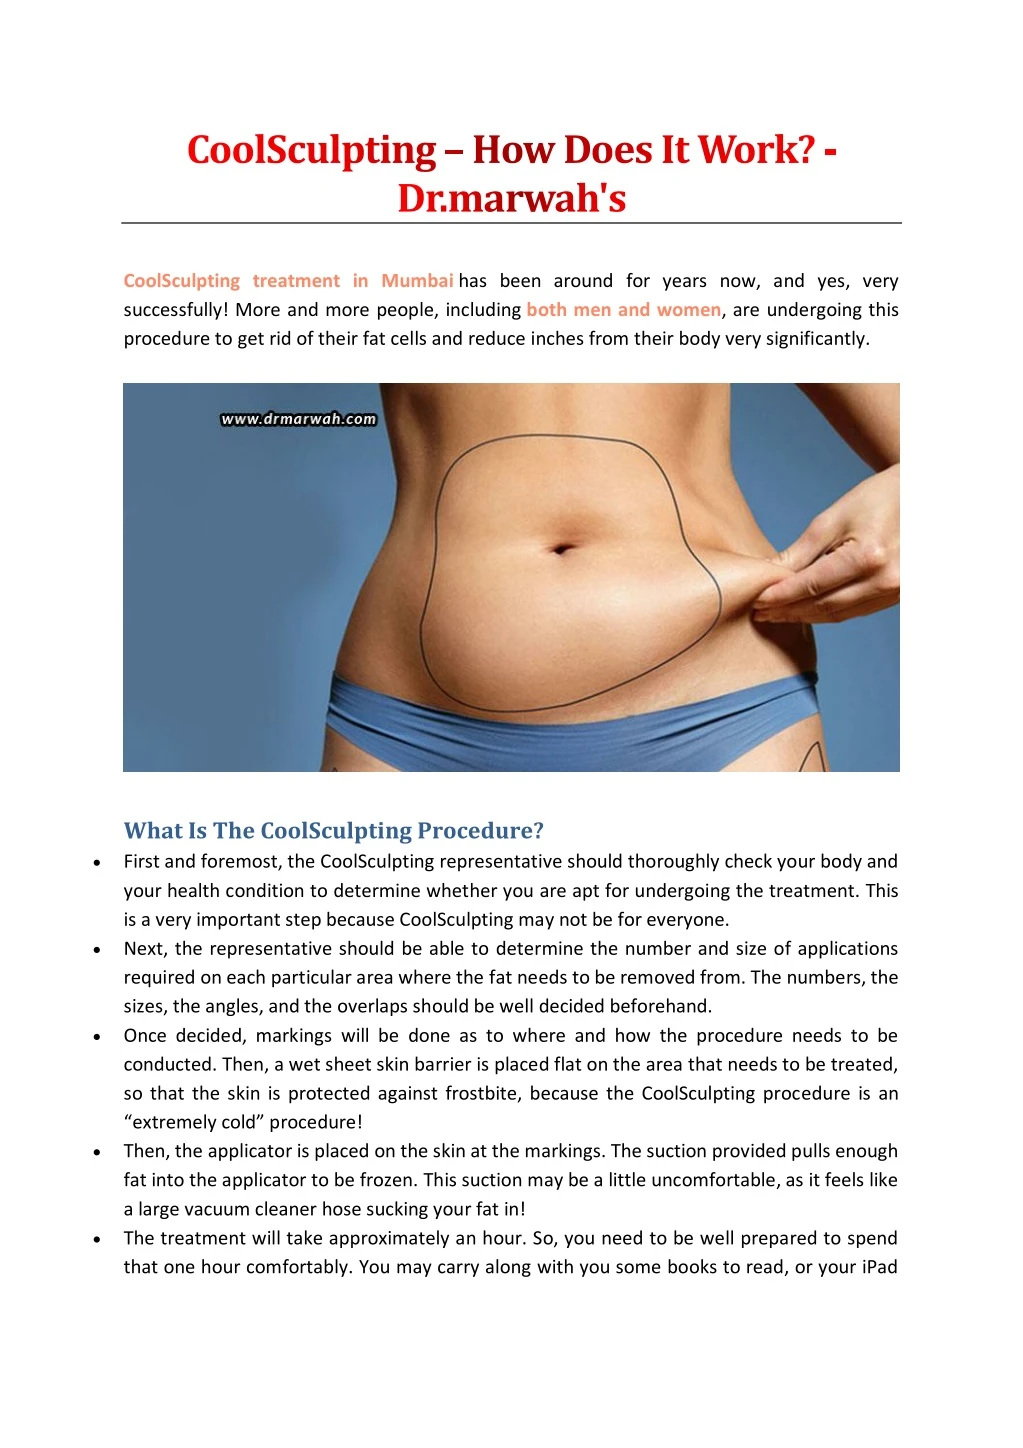 coolsculpting treatment in mumbai has been around